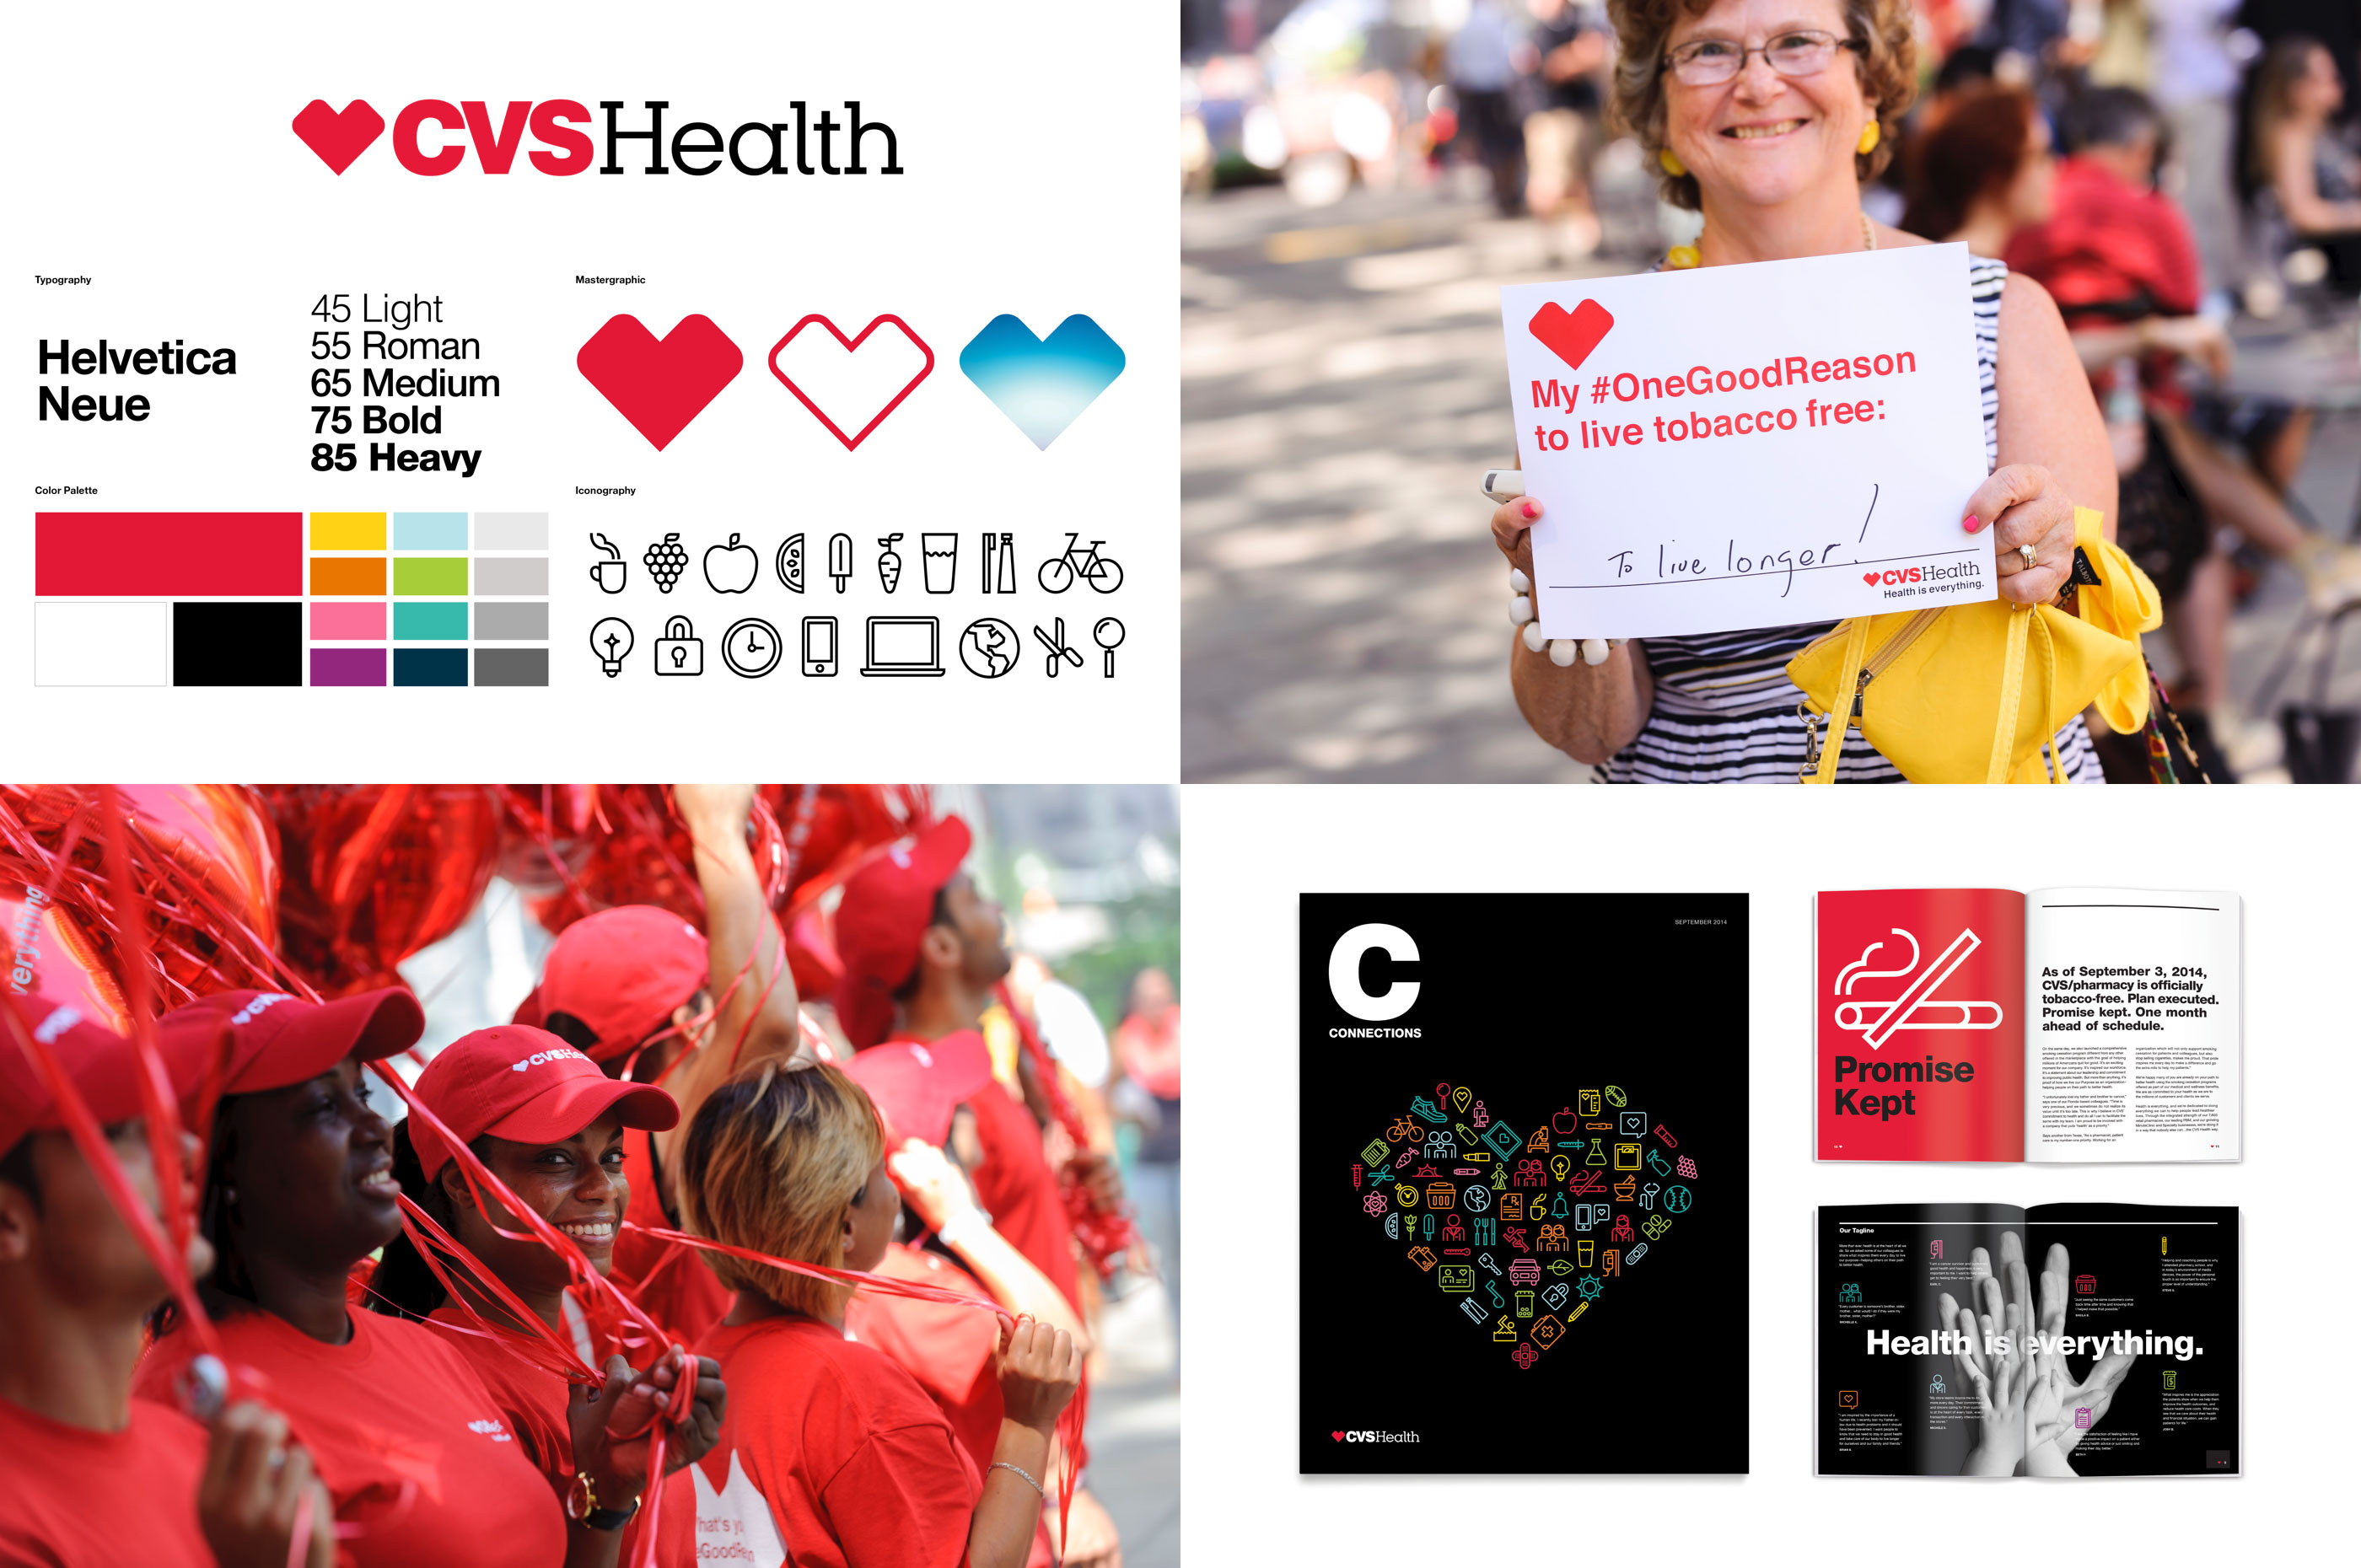 cvs health is everything